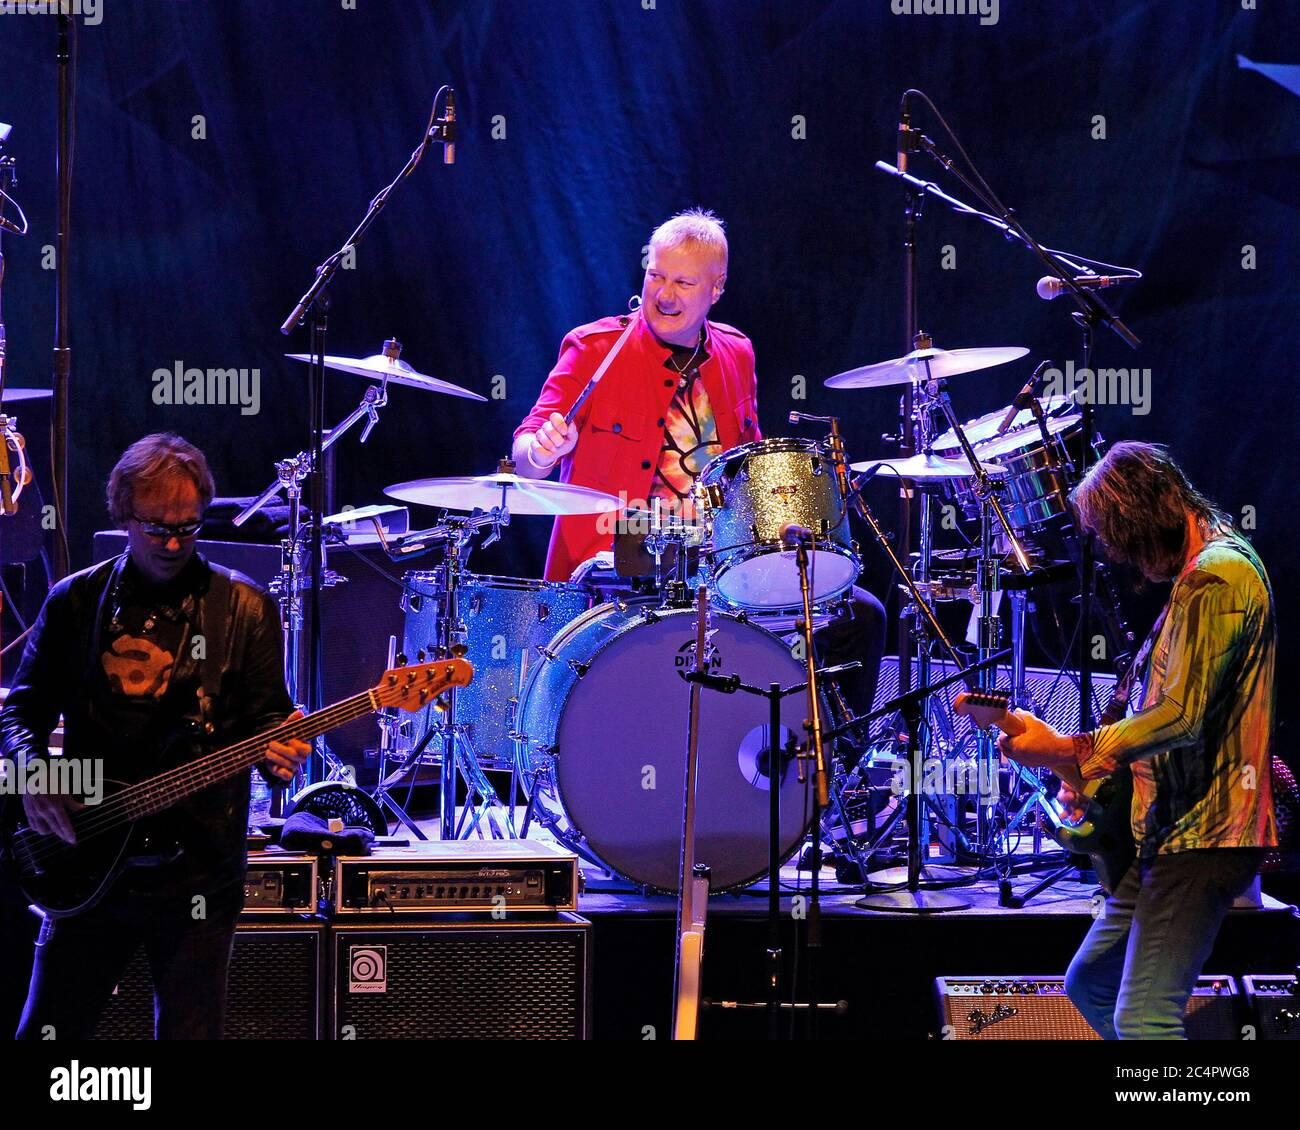 Drummer Gregg Bissonette performs with Ringo Starr and the All Starr Band at the  Broward Center for the Performing Arts in Fort Lauderdale, Florida. Stock Photo